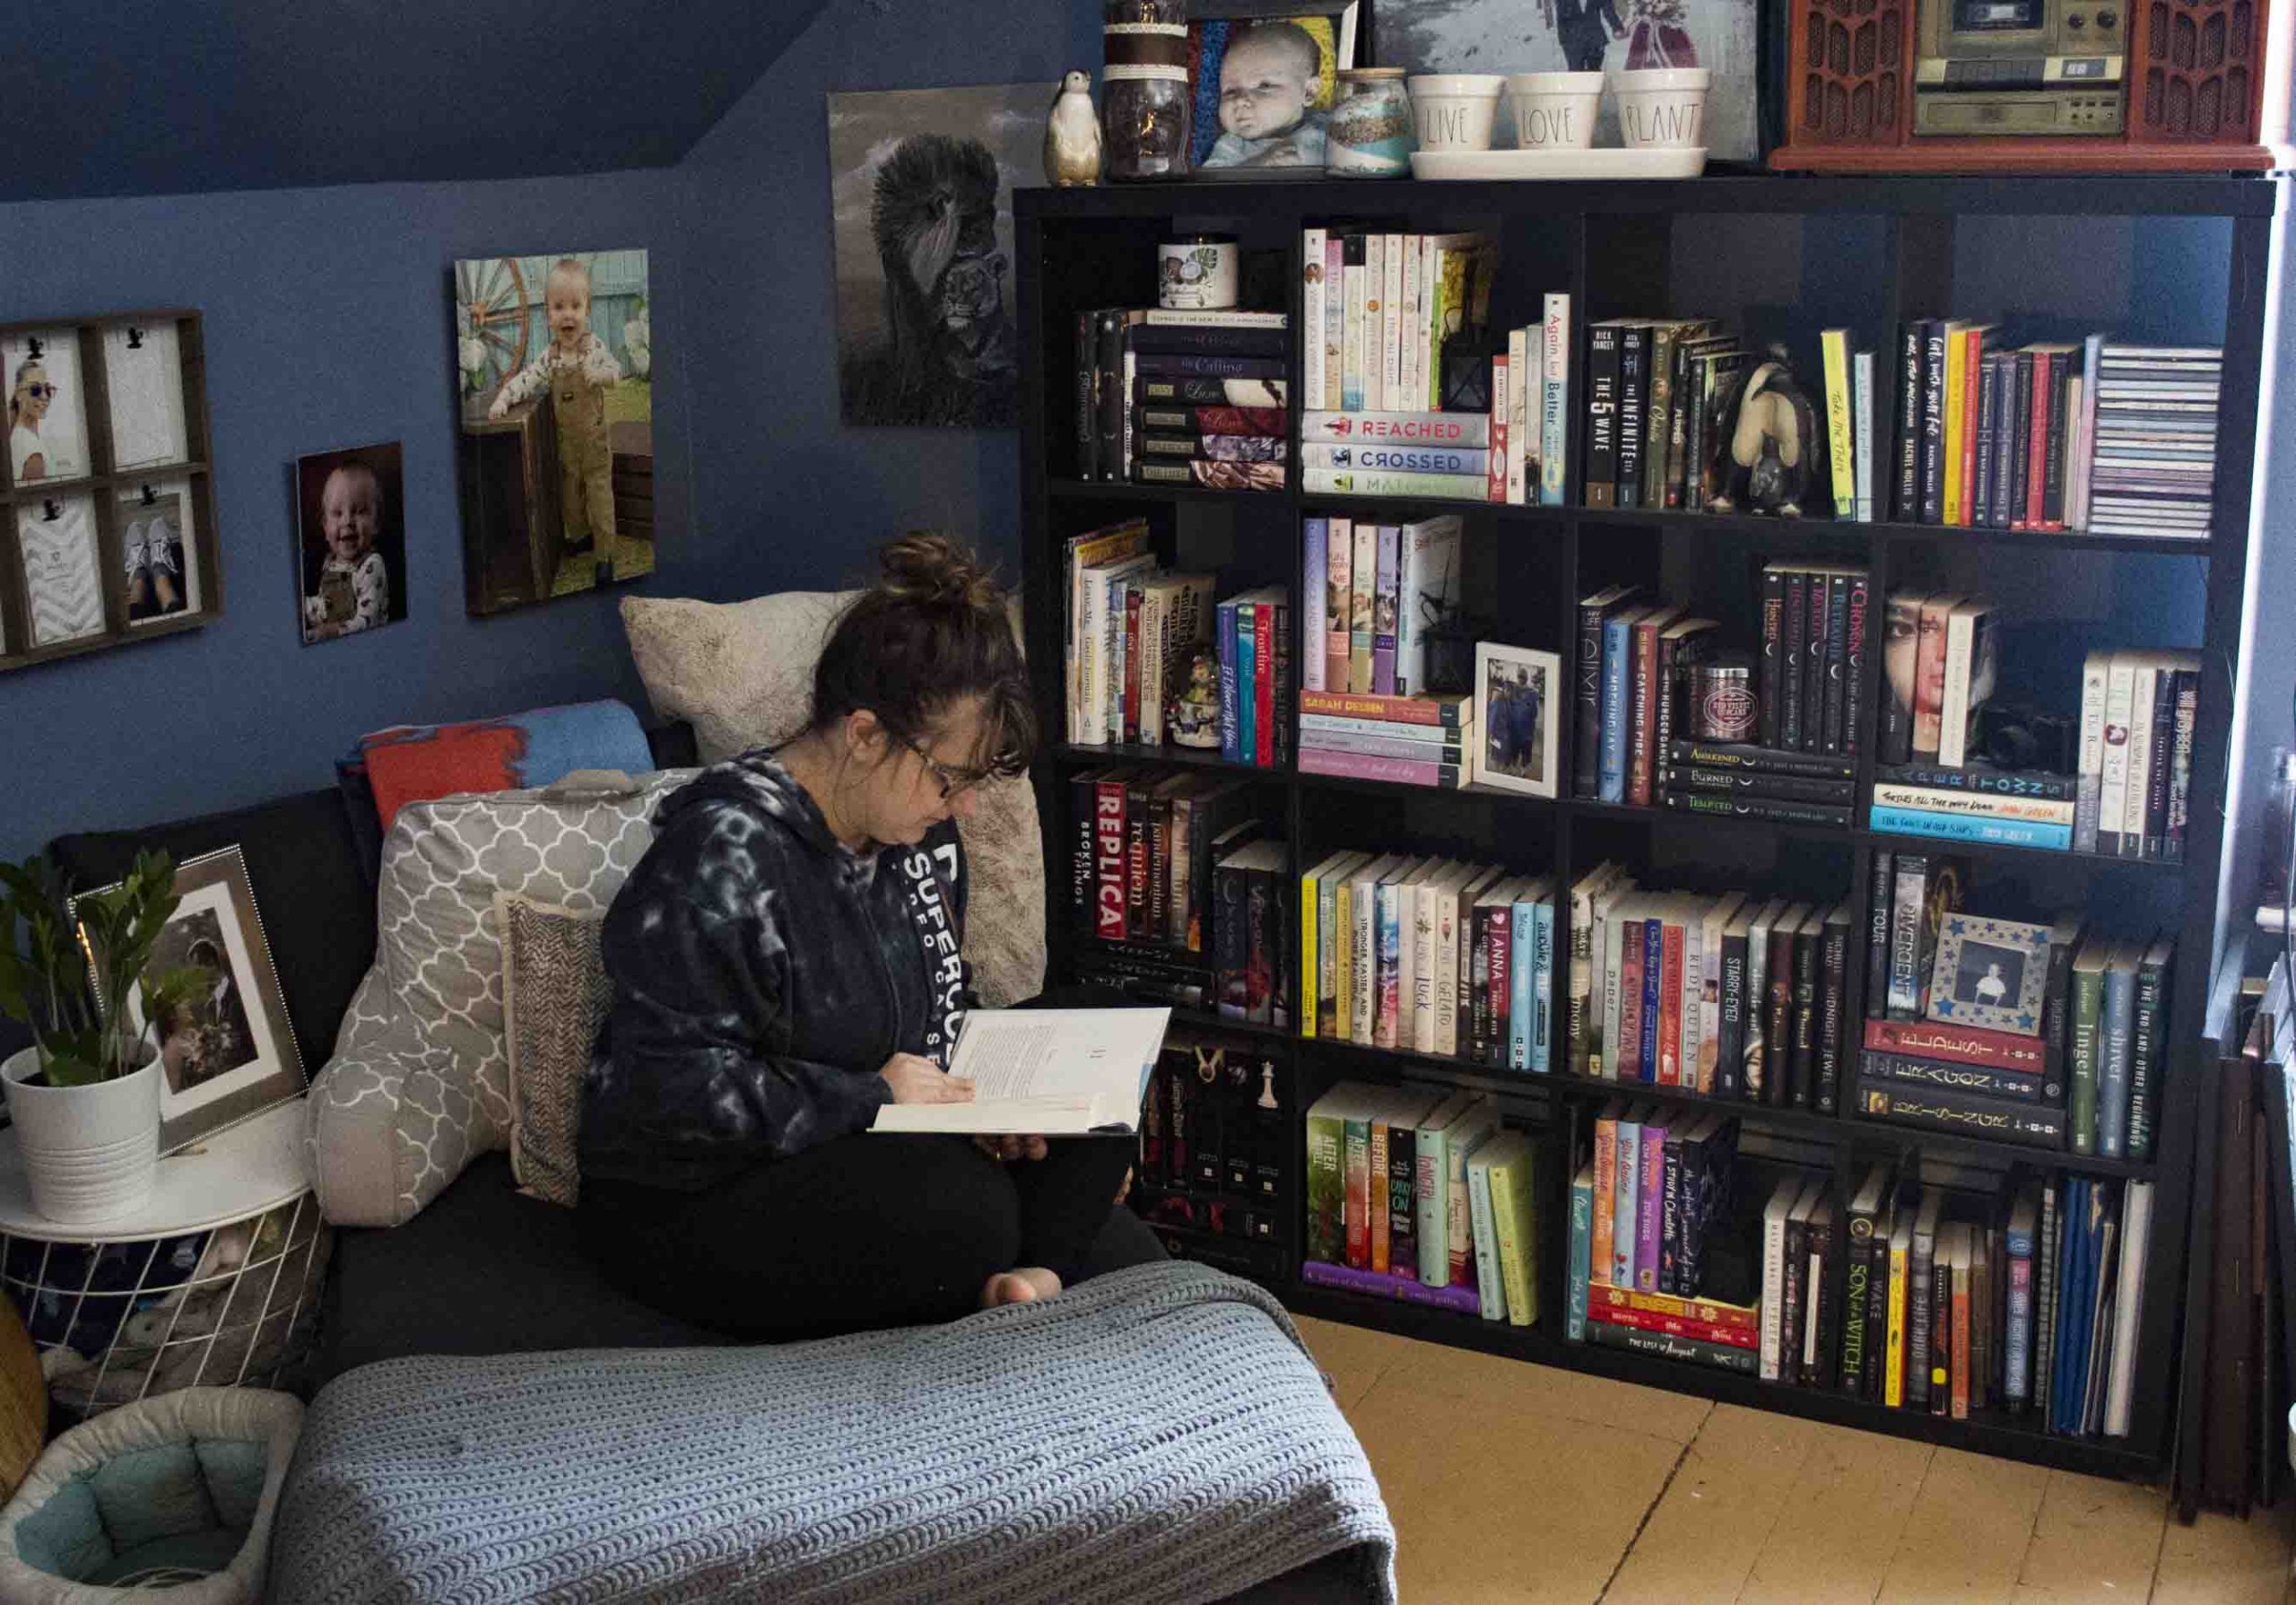 Girl reading book on chair in front of bookshelf